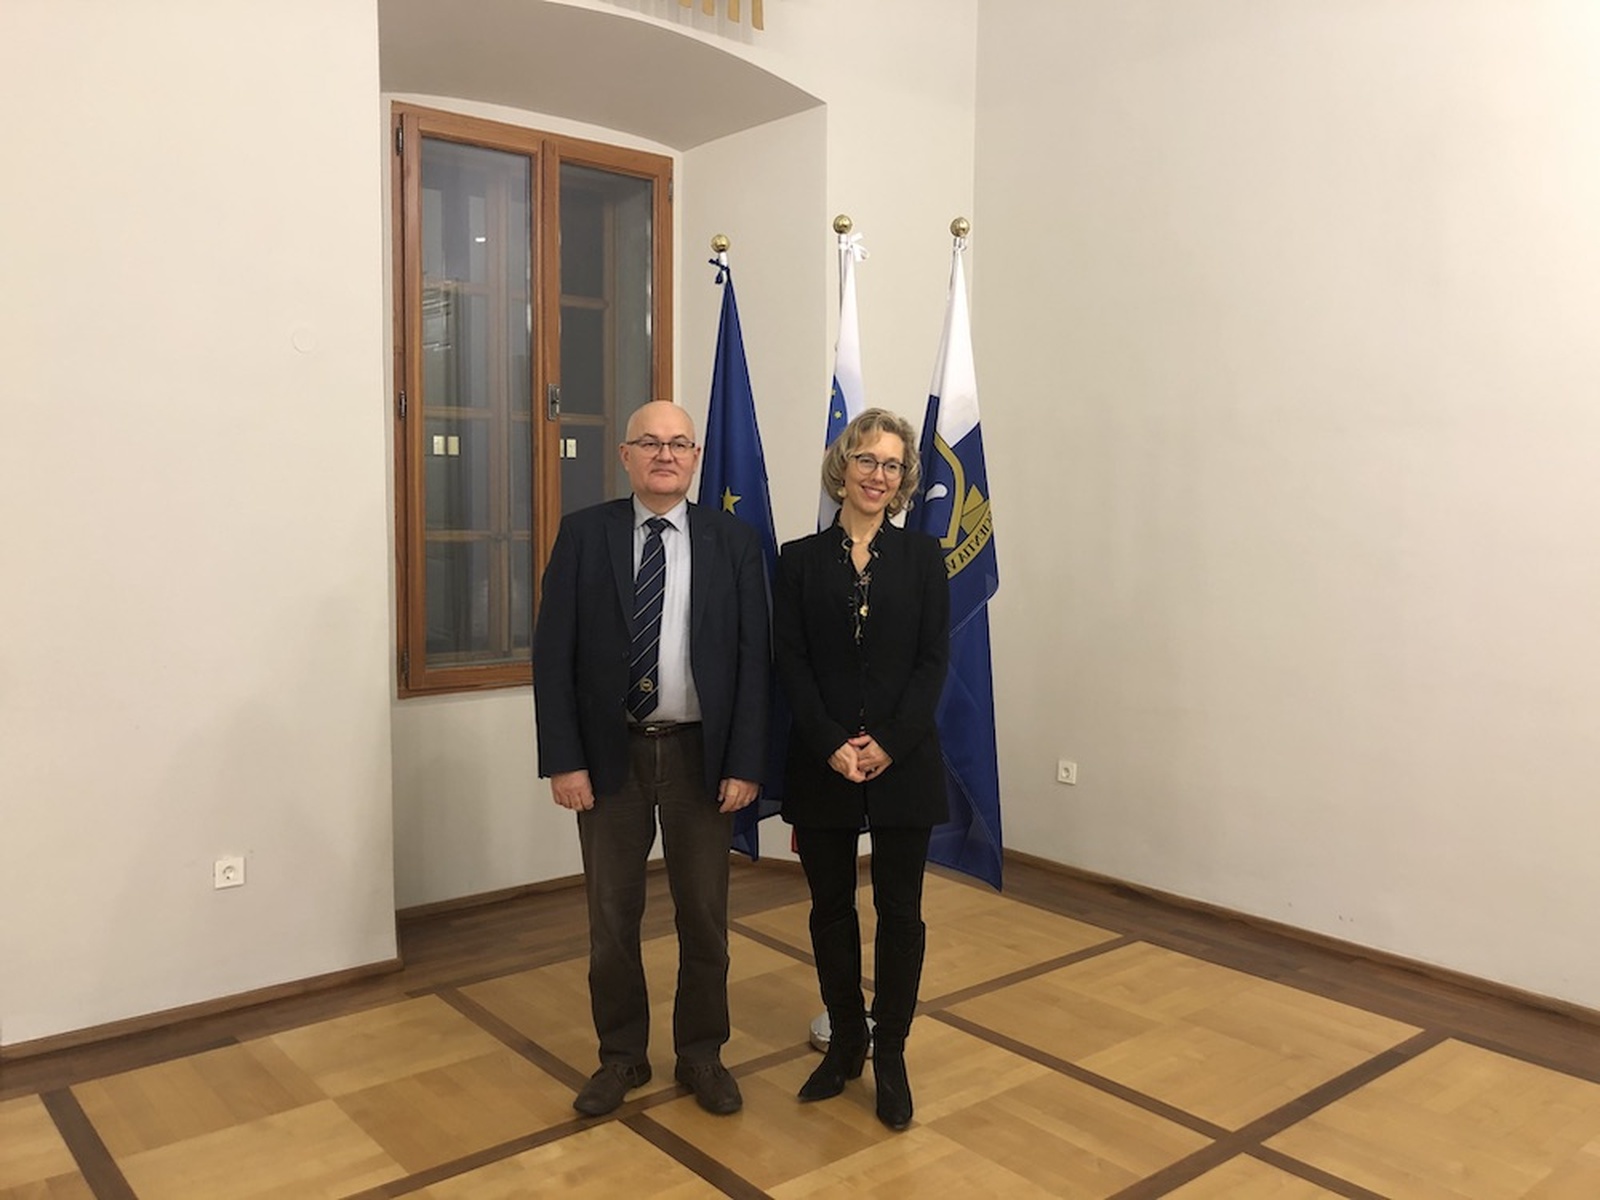 Vice-Rector for Research and Arts, Prof. Dr. Gvido Bratina and French Ambassador to Slovenia, Her Excellency Florence Ferrari.